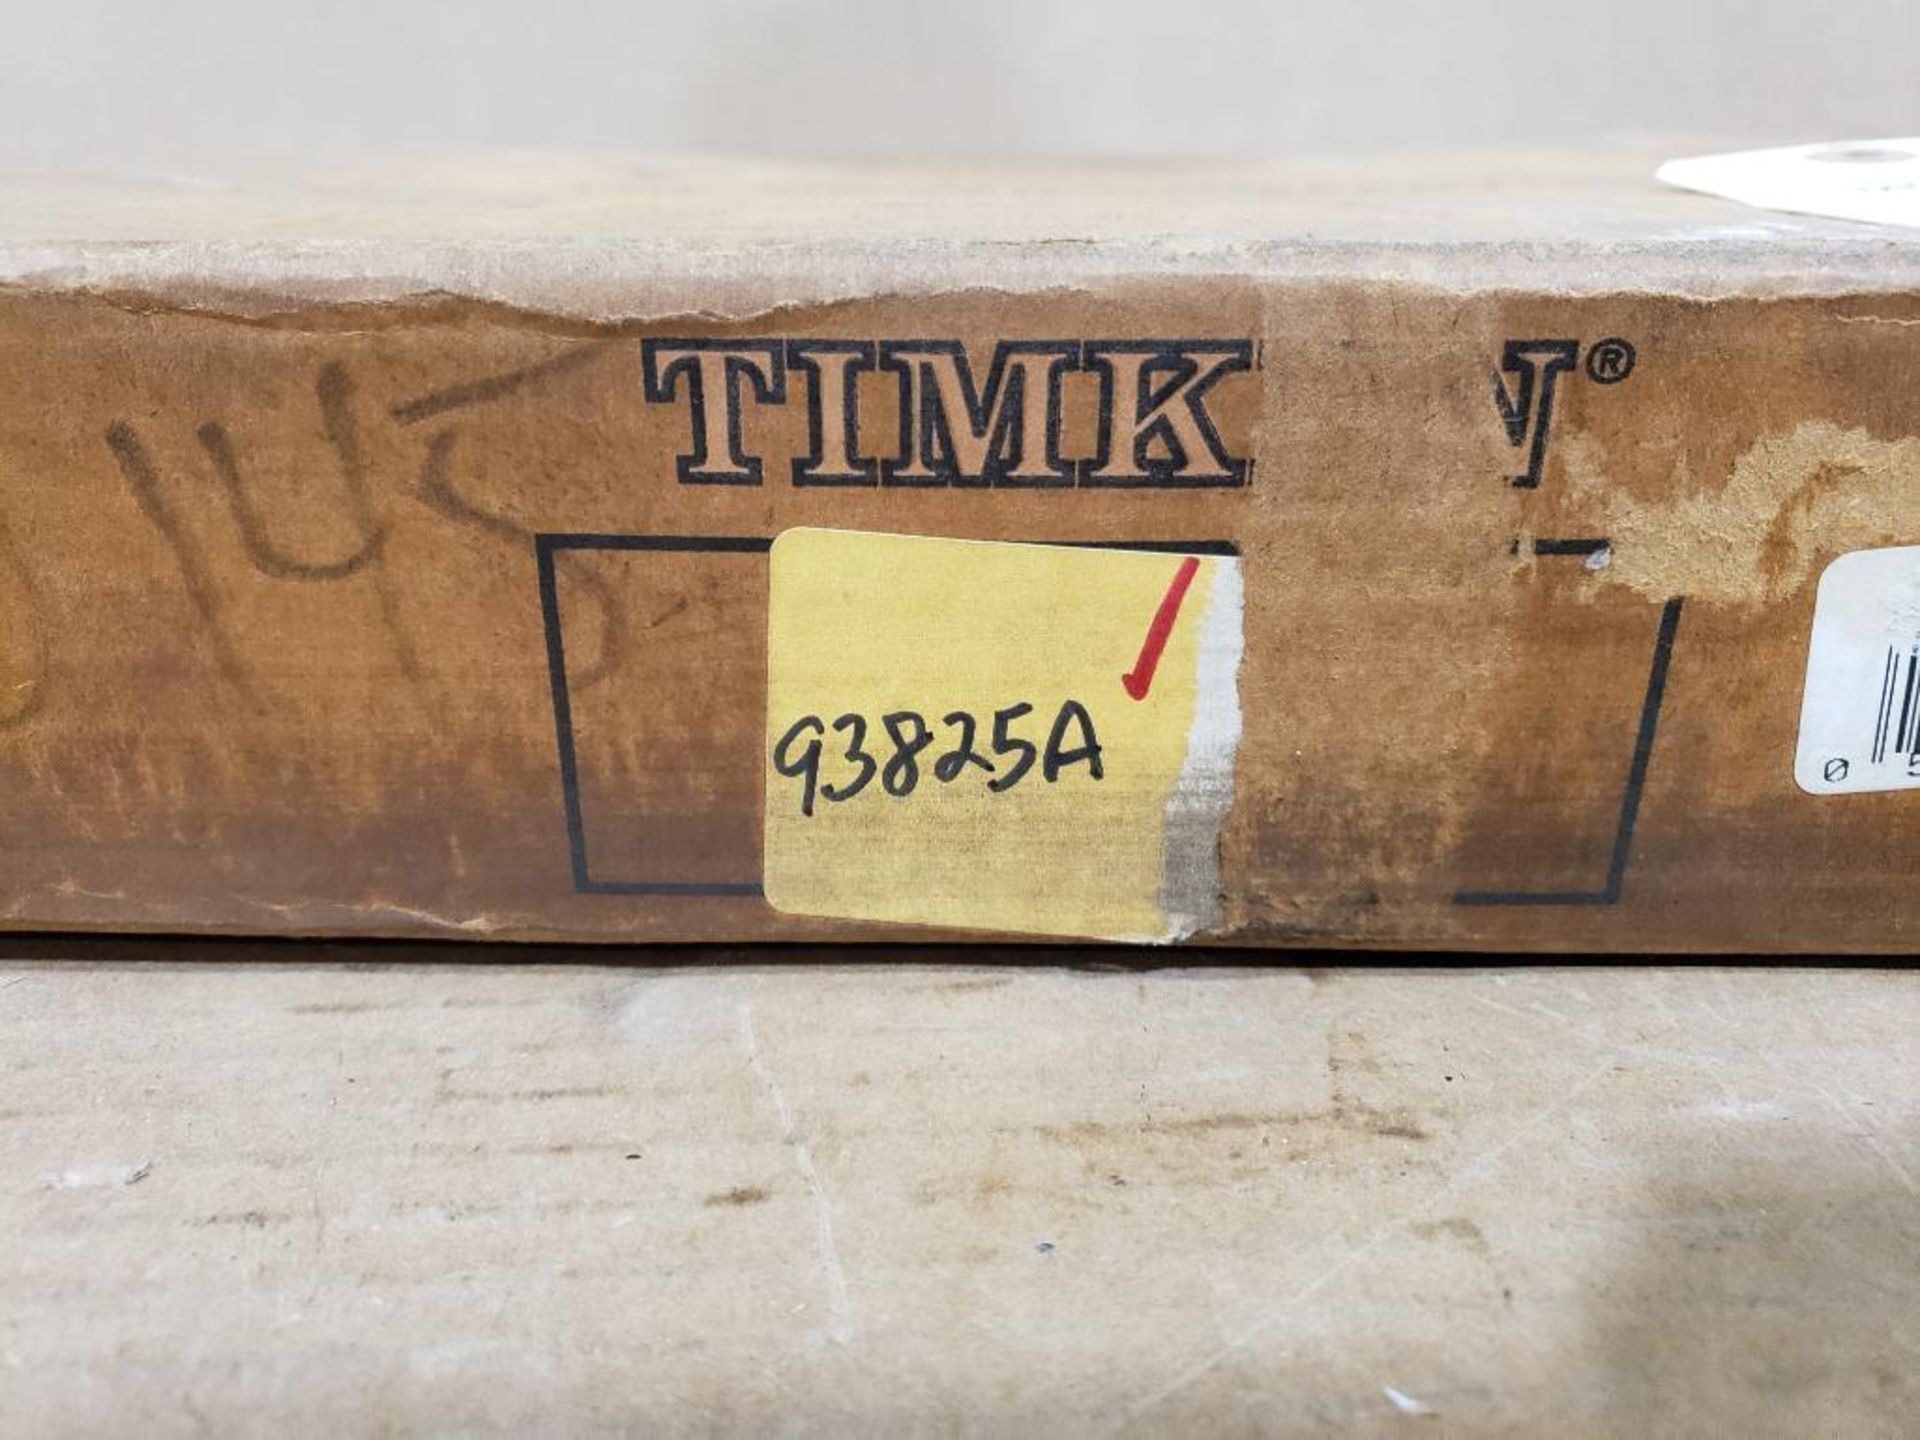 Timken bearing. Part number 93825A. - Image 2 of 3